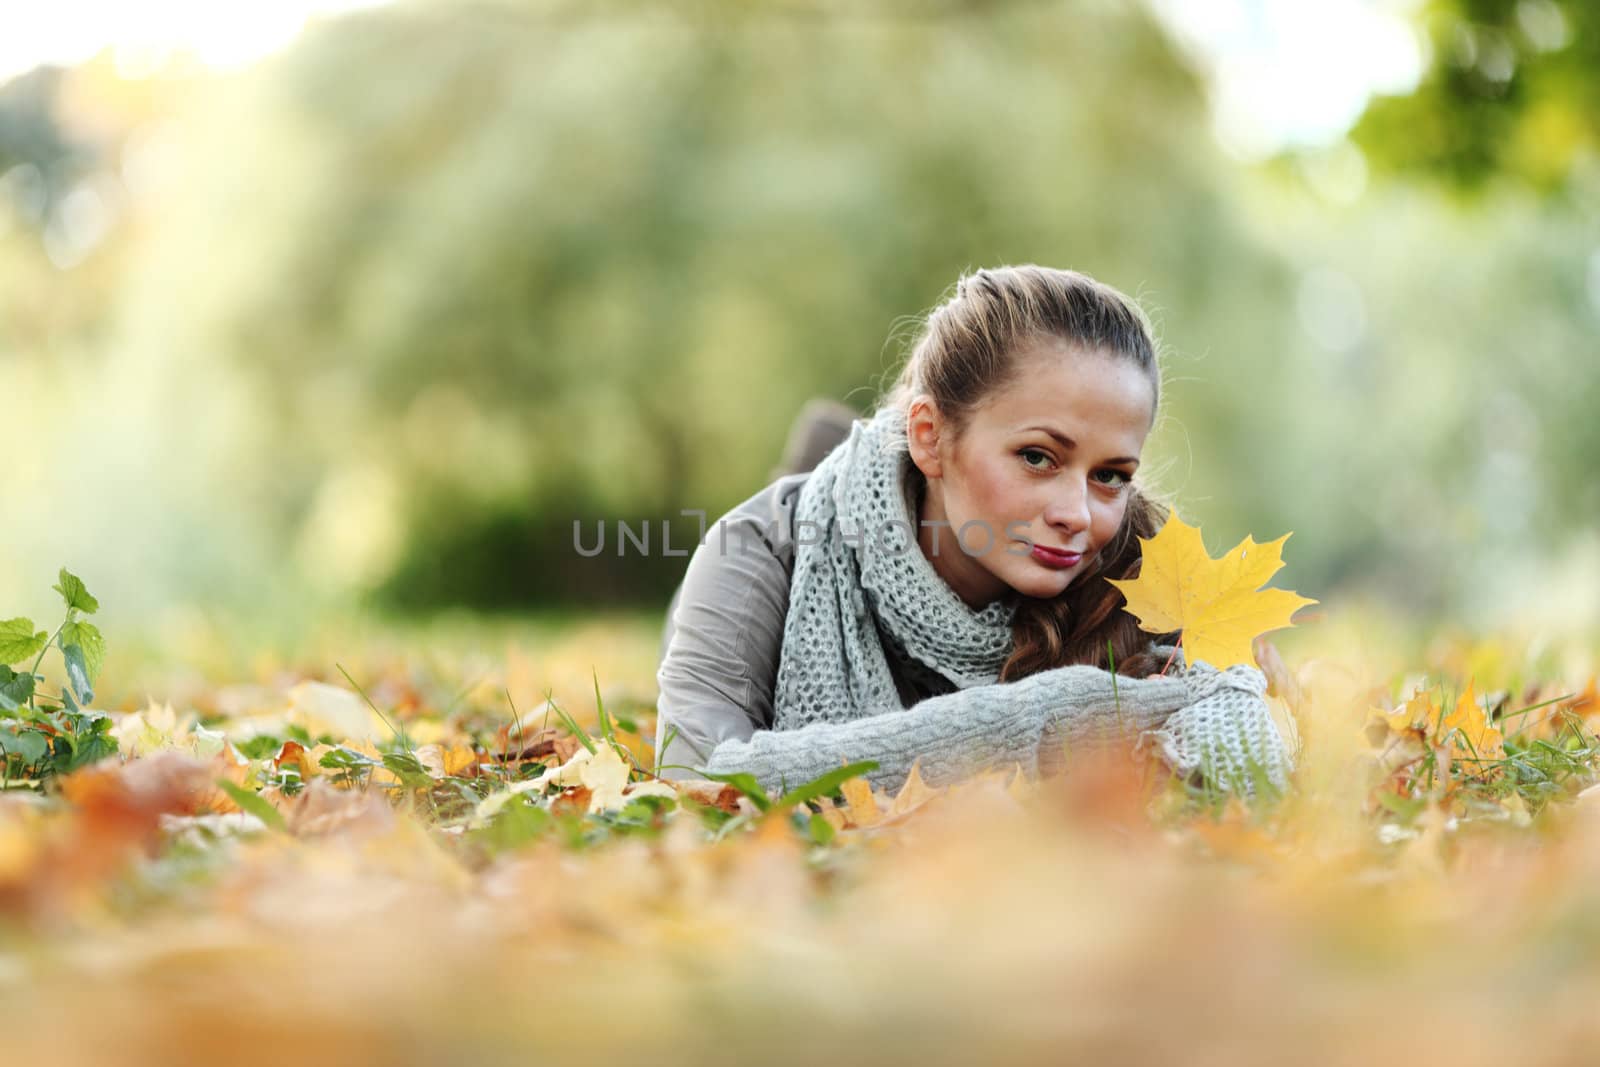  woman portret in autumn leaf close up